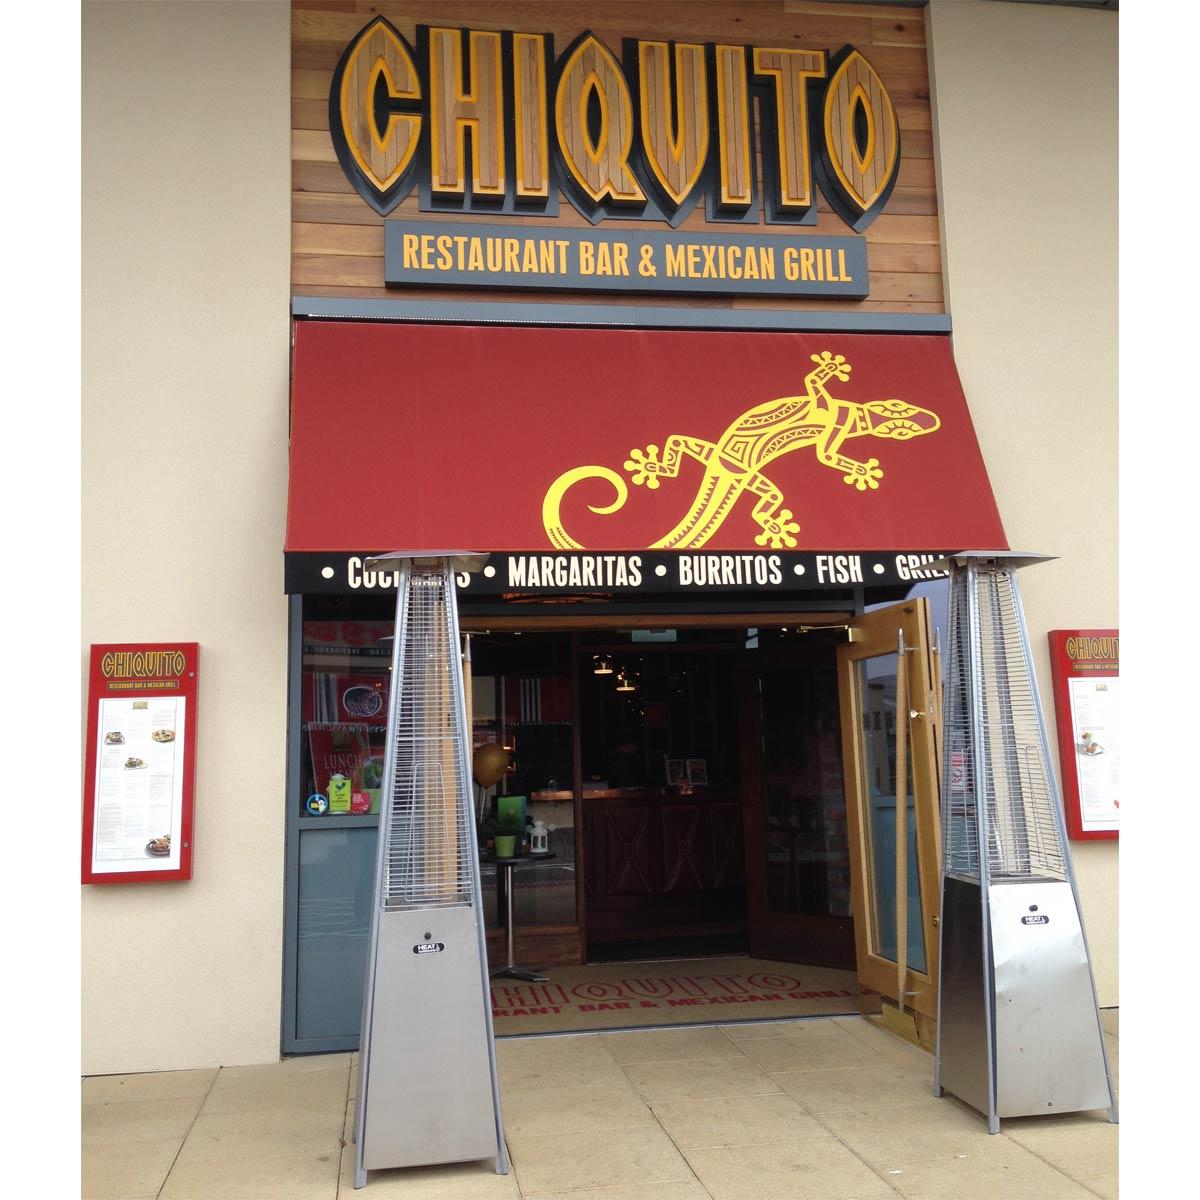 Pair of Athena Plus+ Pyramid Patio Heaters outside Chiquito bar